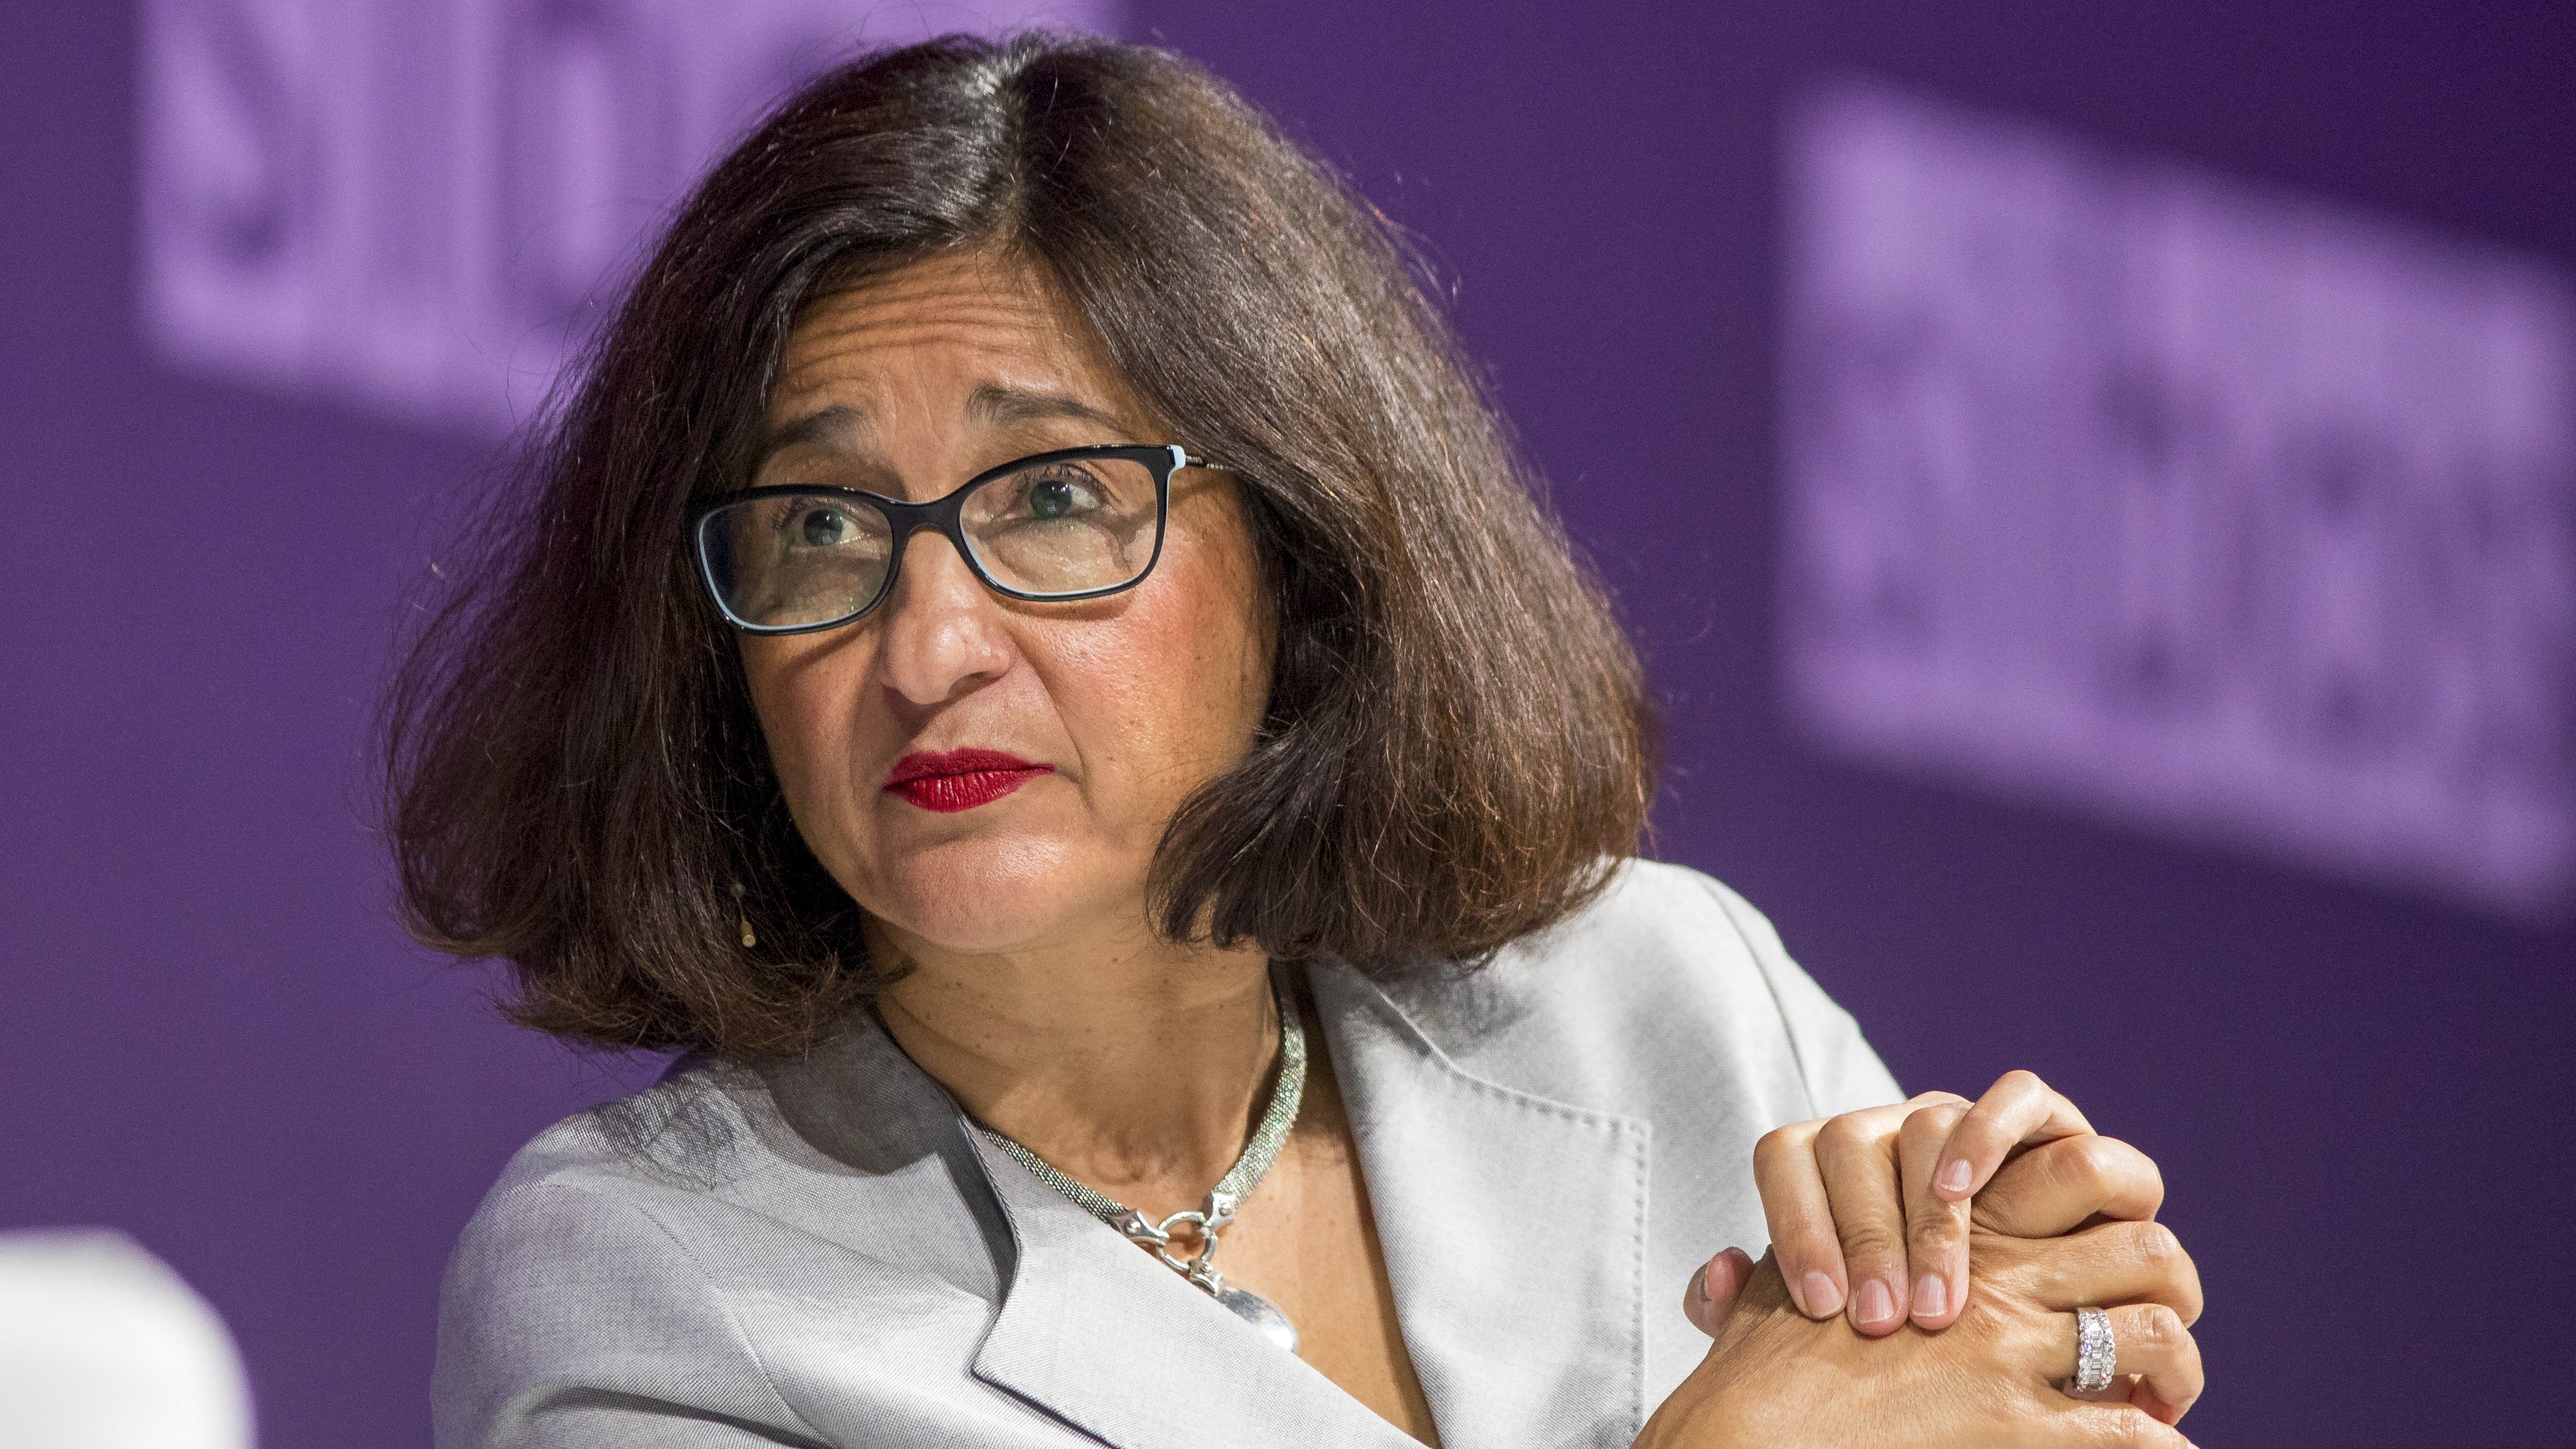 Minouche Shafik, who is a former director of the London School of Economics, requested that police forcibly remove a student encampment at Columbia University